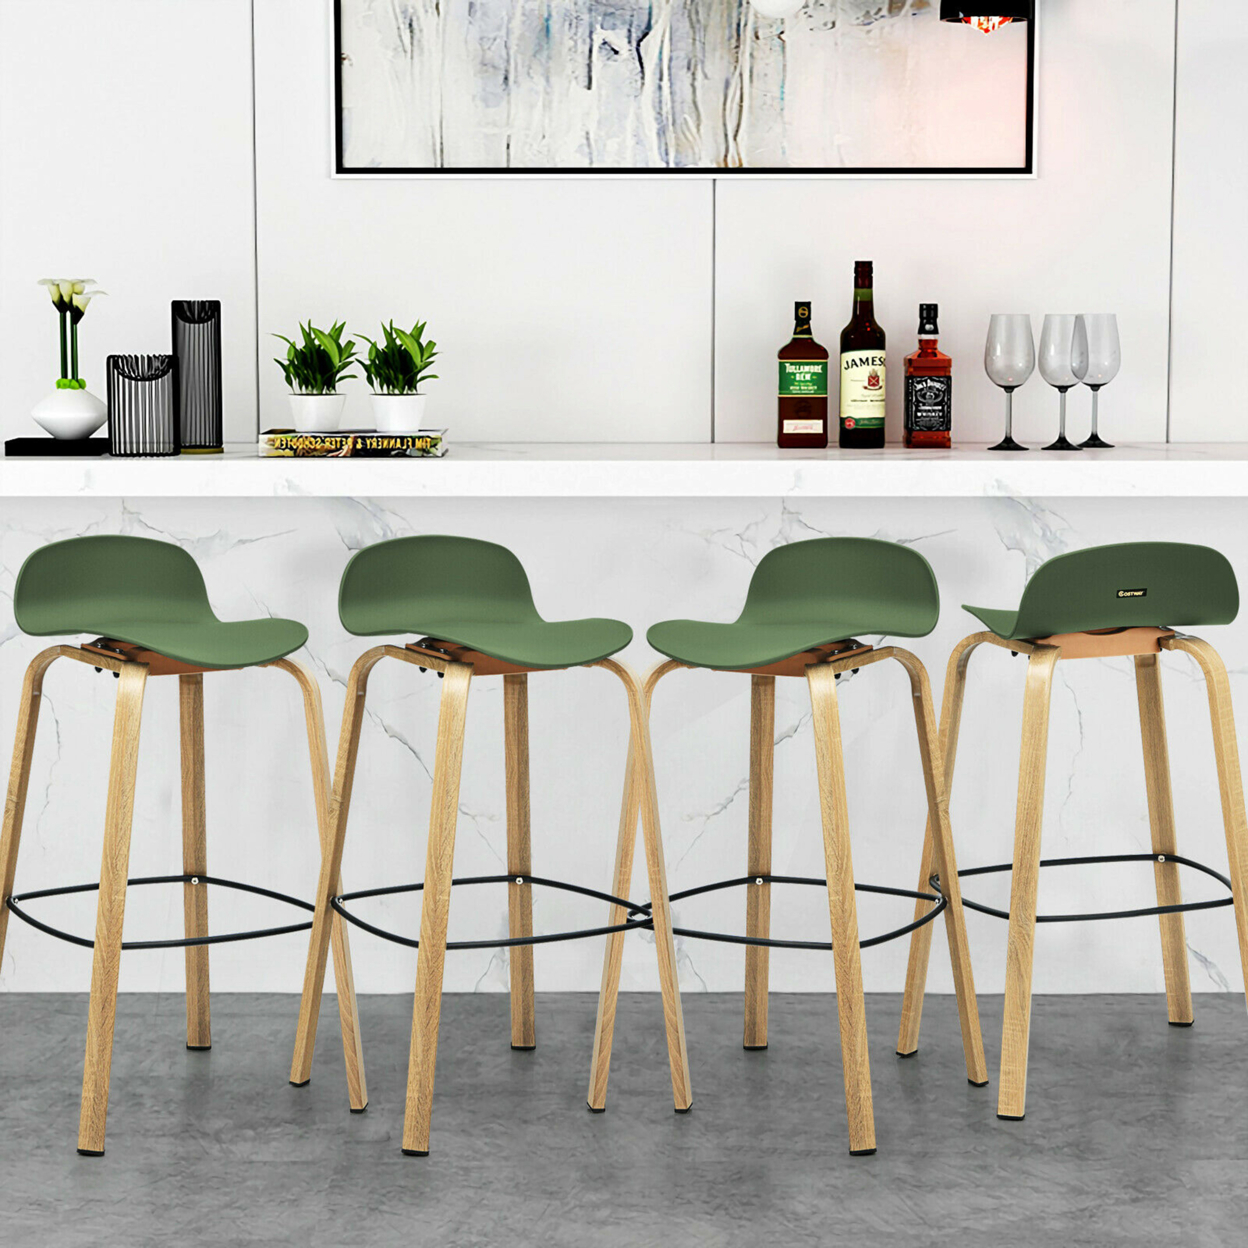 Modern Set Of 4 Barstools 30inch Pub Chairs W/Low Back & Metal Legs Green